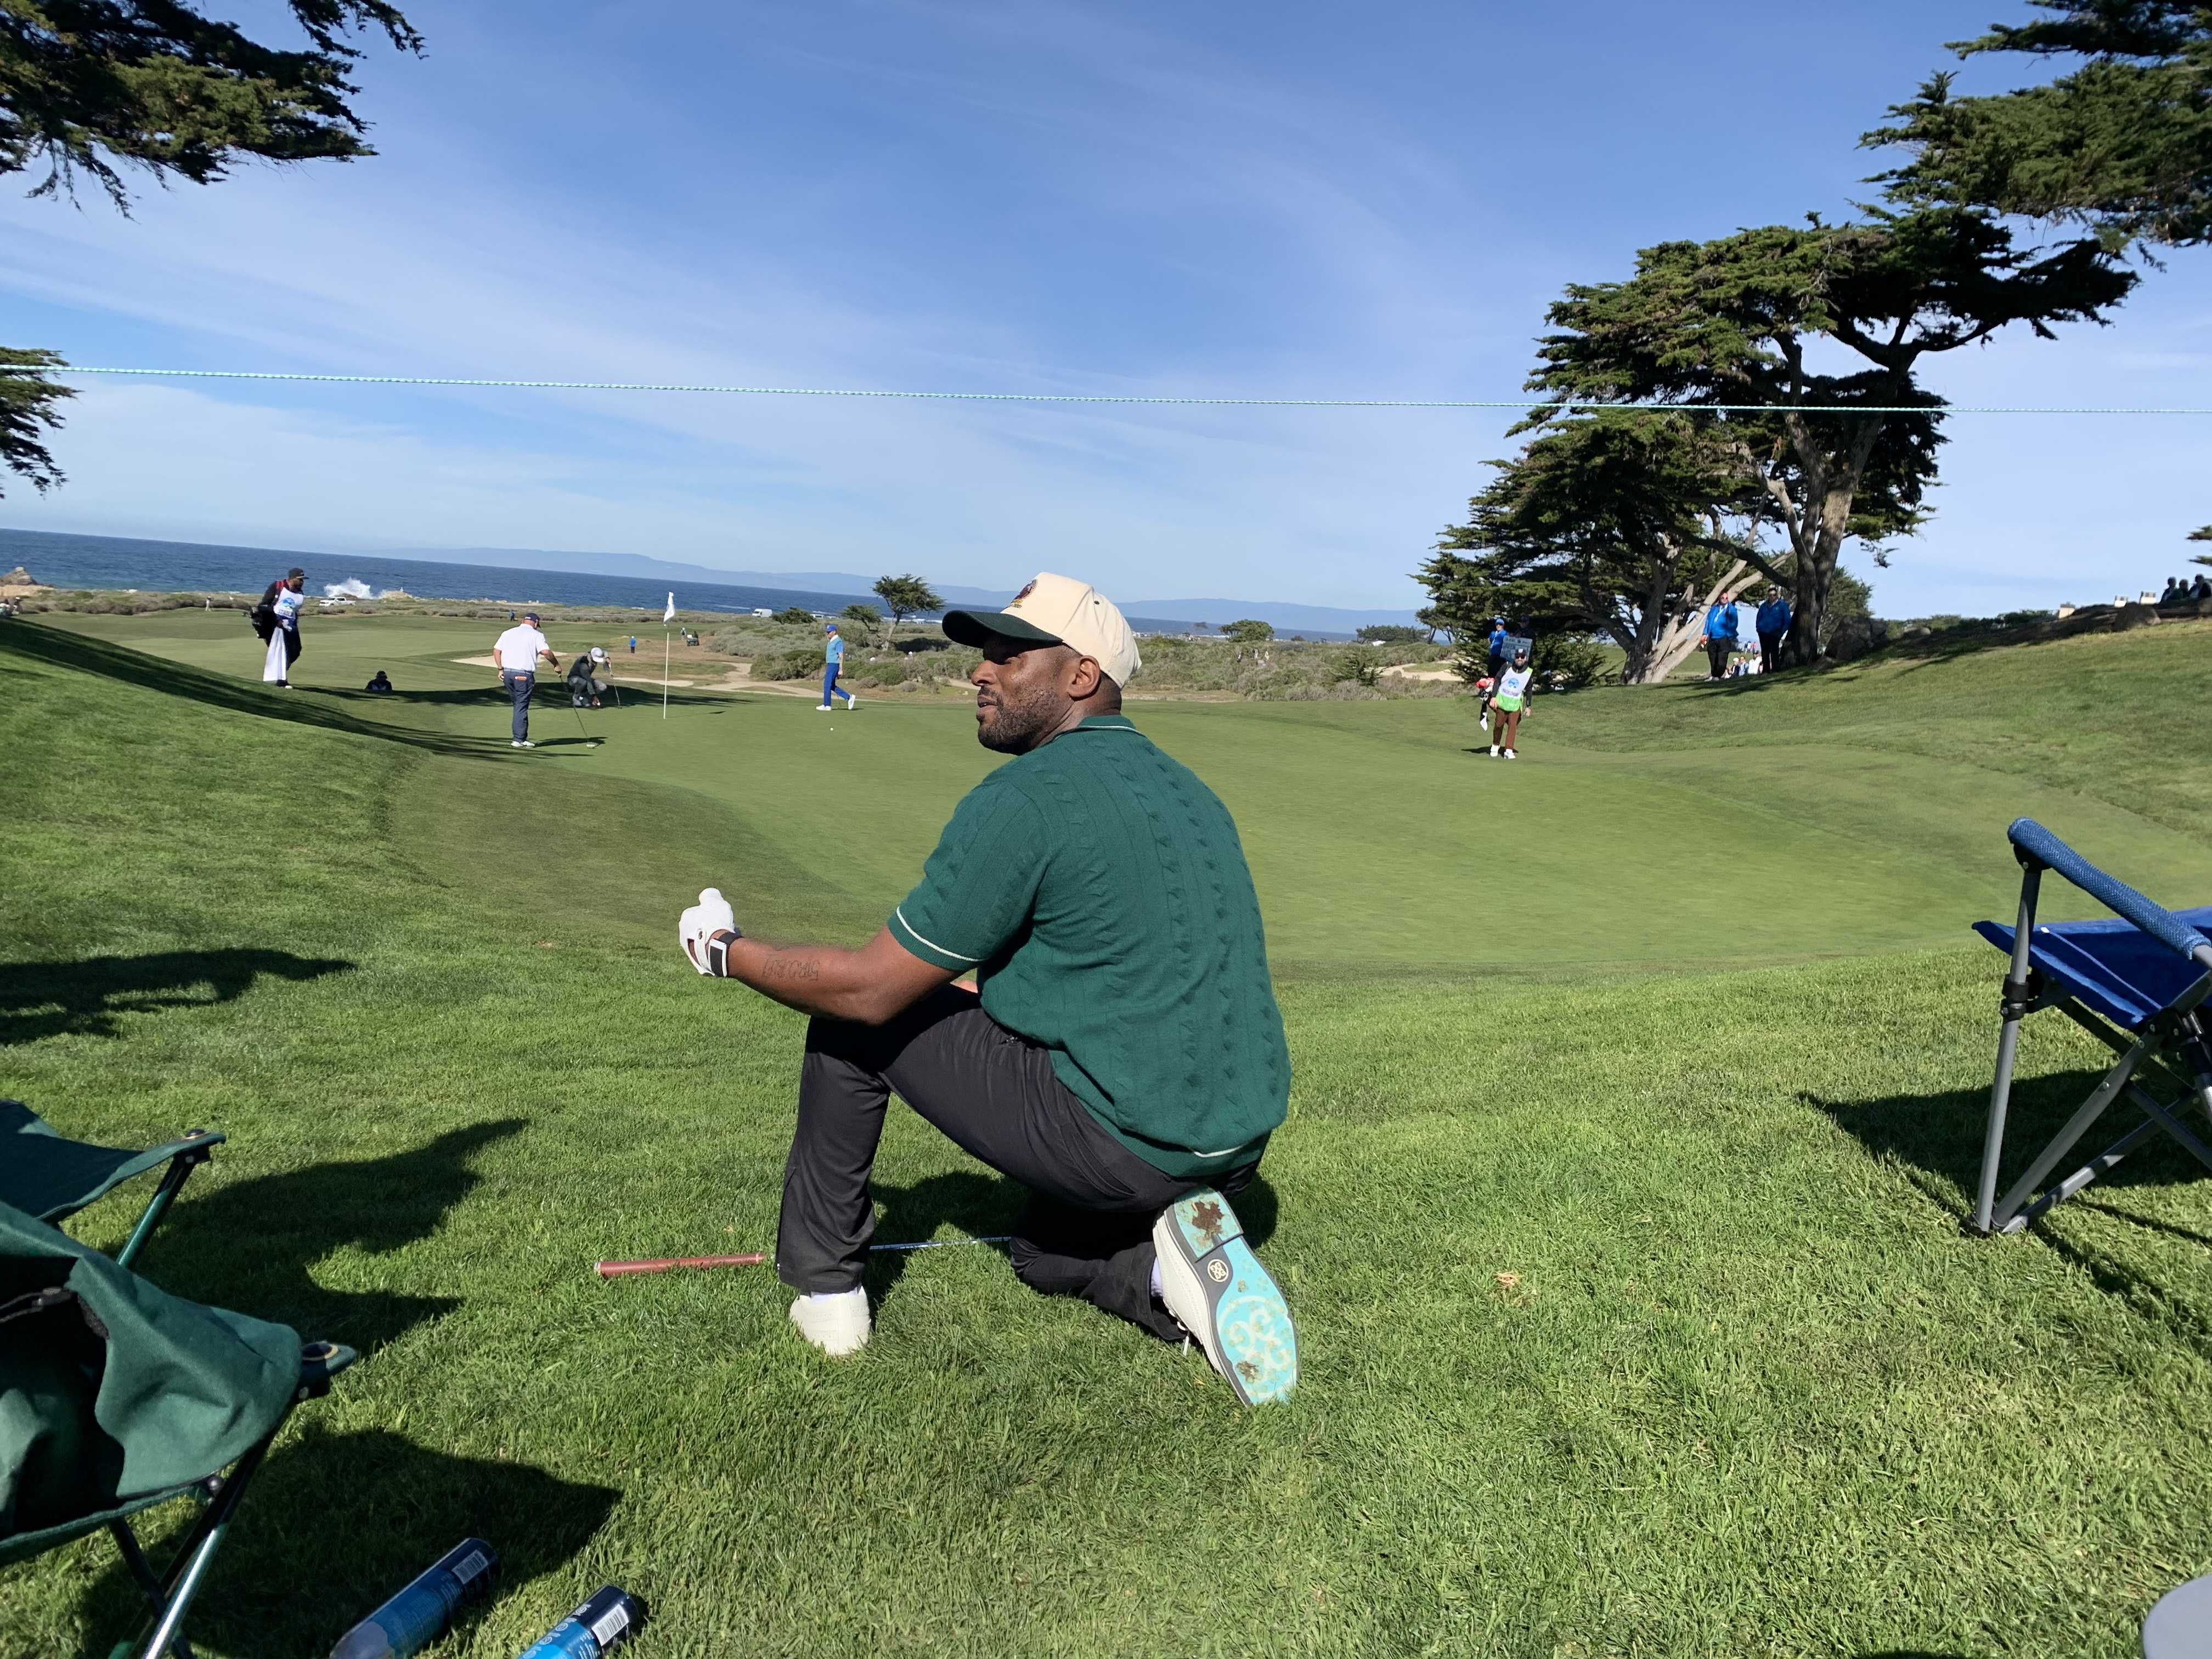 New names draw a new crowd to the ATandT Pebble Beach Pro-AM